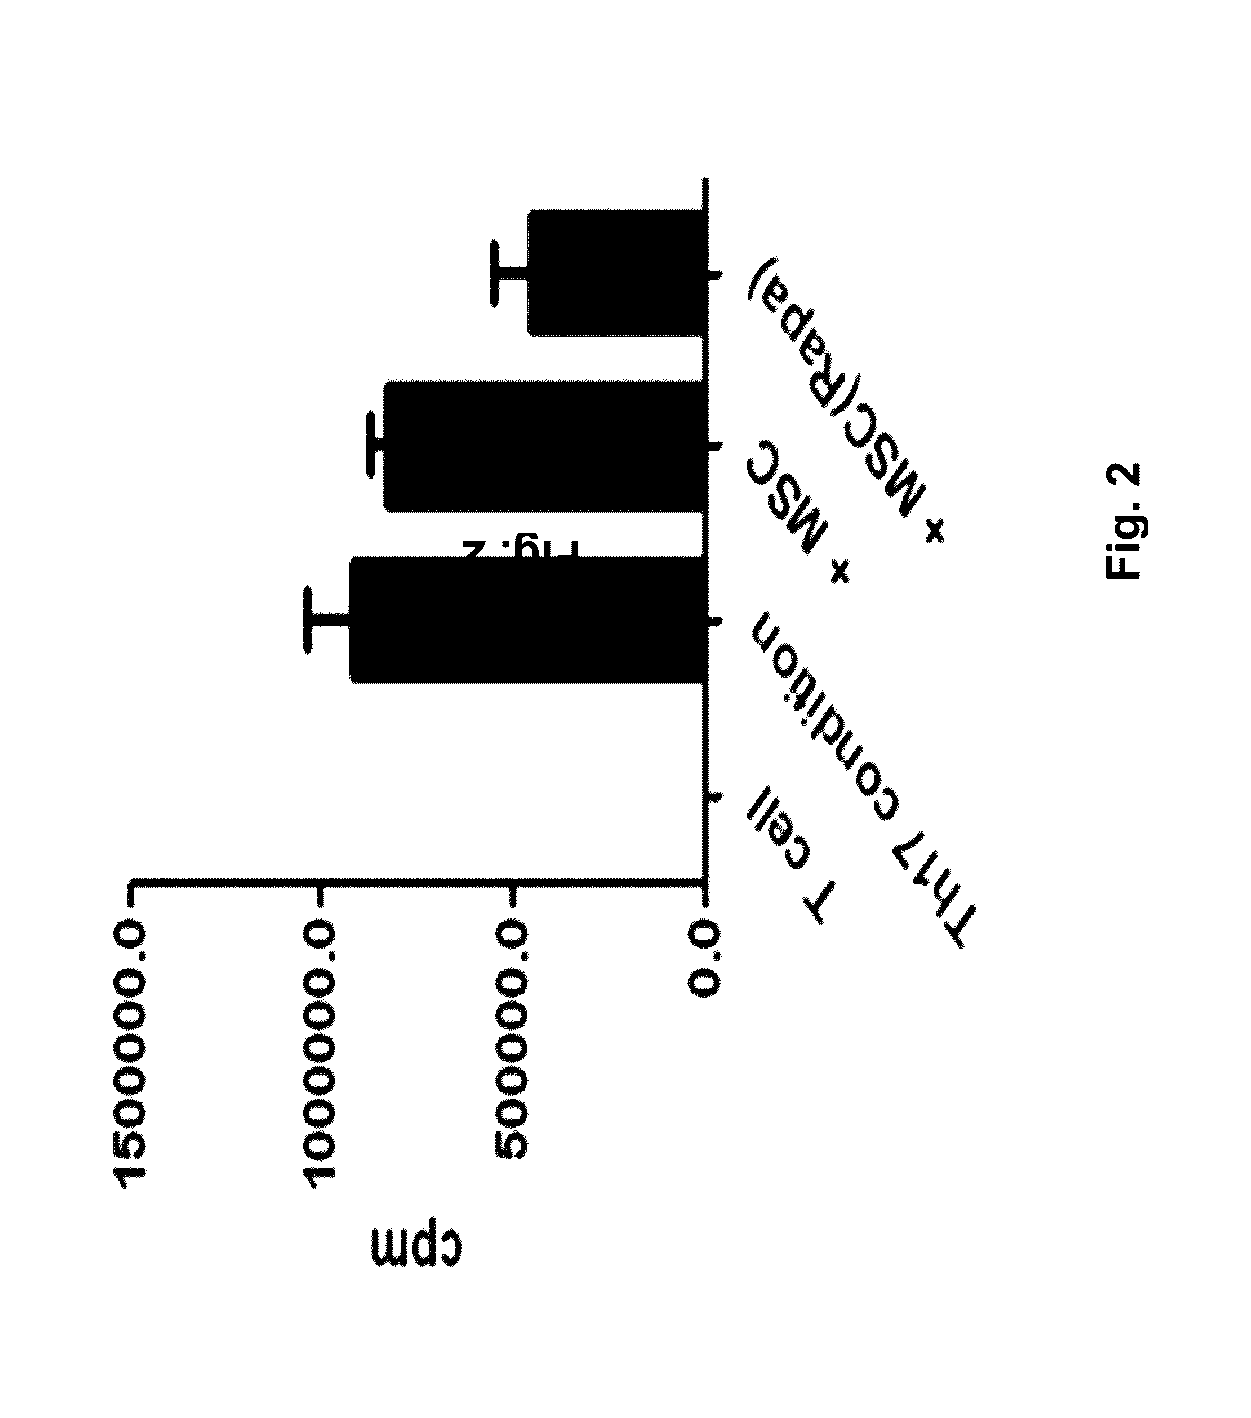 Mtor/stat3 signal inhibitor-treated mesenchymal stem cell having immunomodulatory activity, and cell therapy composition comprising same, for preventing or treating immune disorders